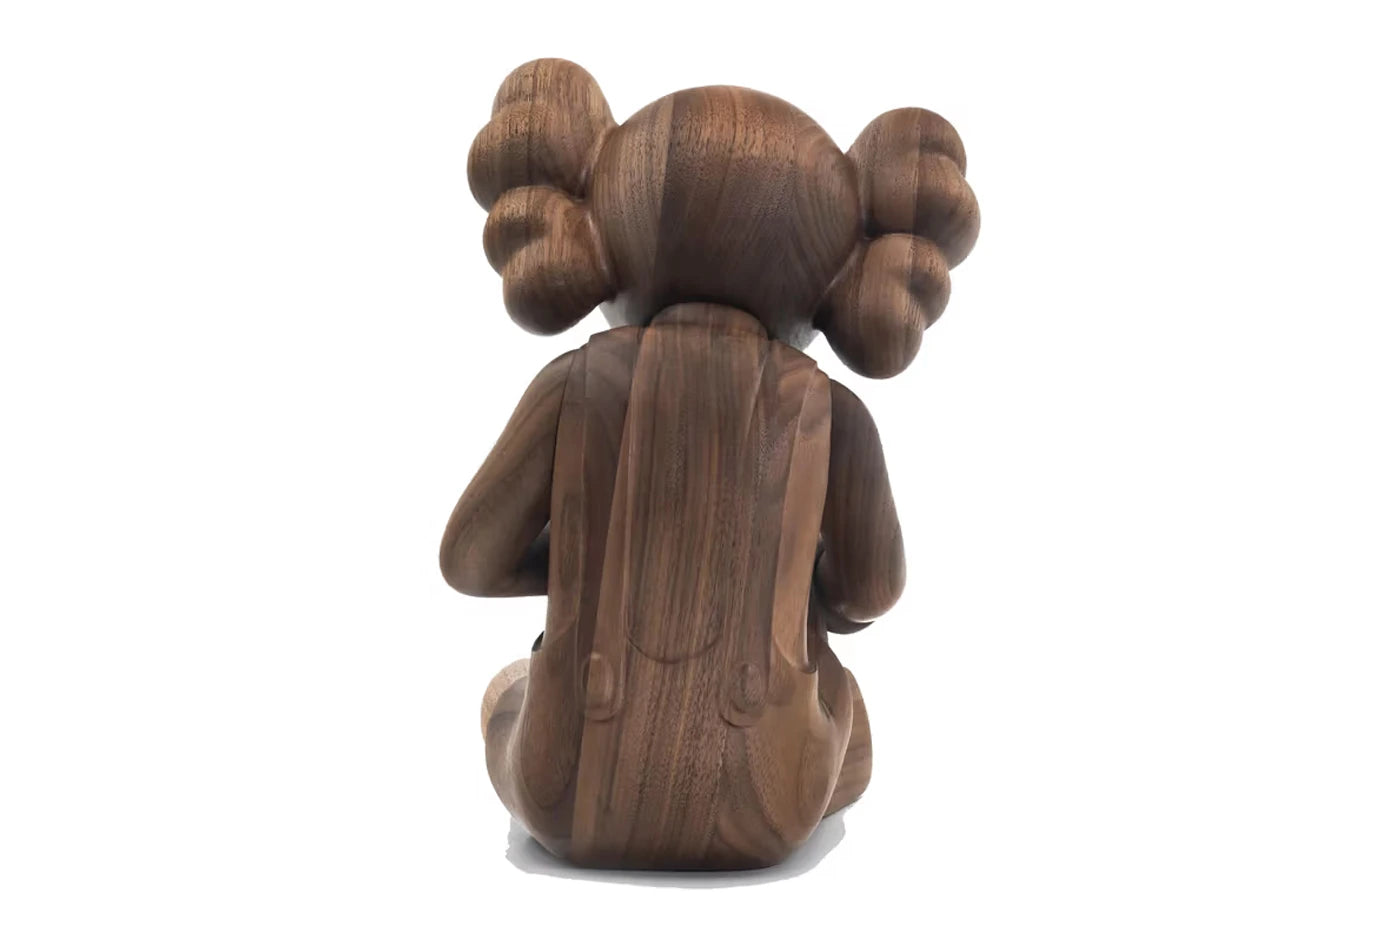 KAWS, Better Knowing, 2023 (AP)